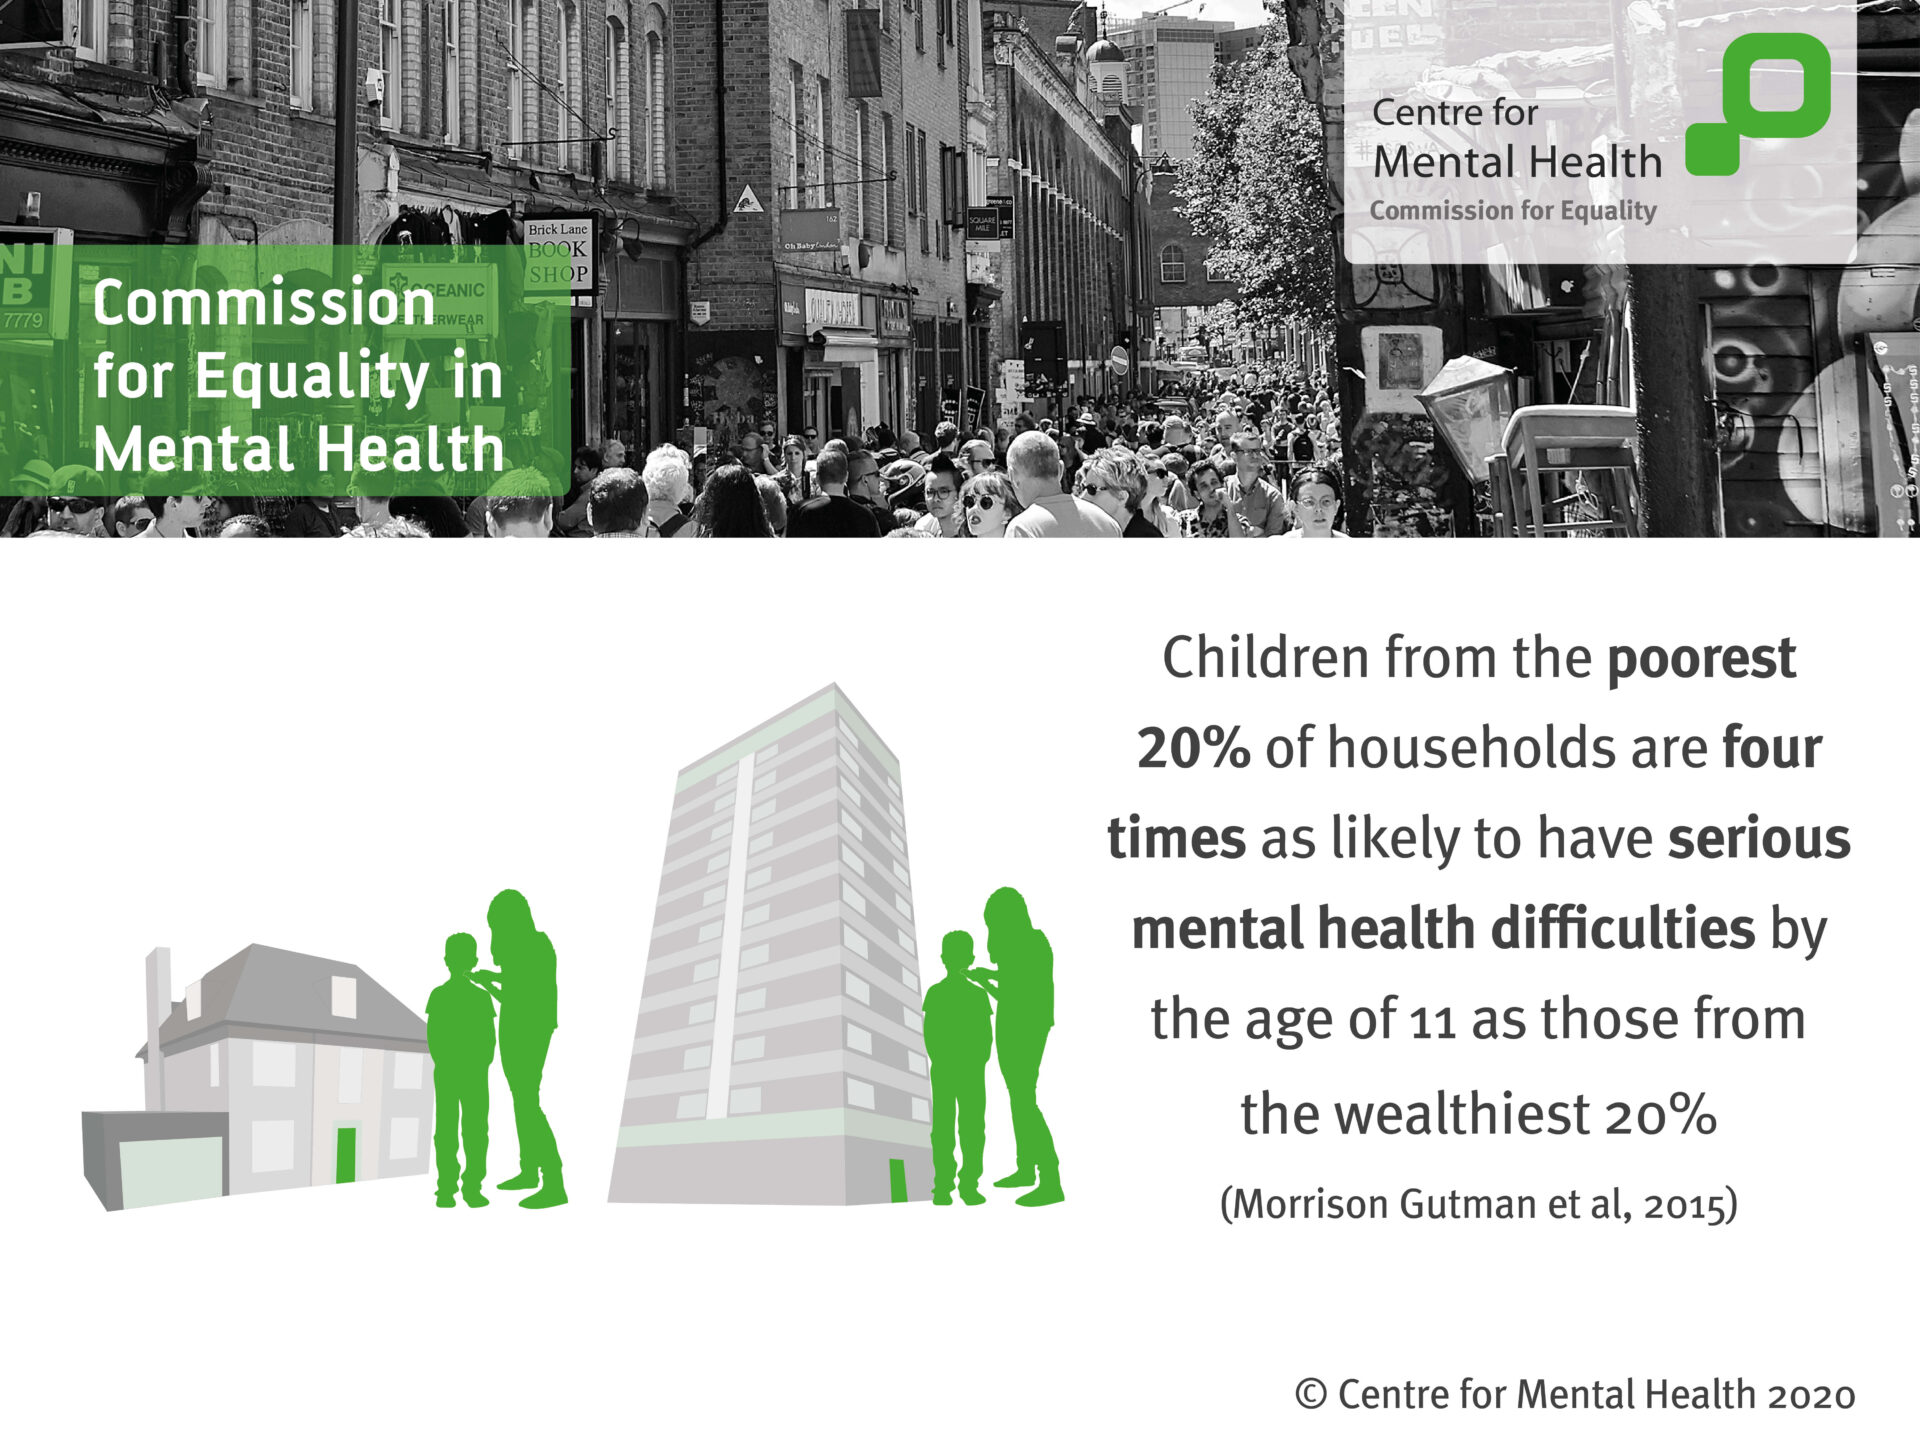 Infographic showing two children next to a detached house and two children next to a tower block. Text reads: children from the poorest 20% of households are four times as likely to have serious mental health difficulties by the age of 11 as those from the wealthiest 20% (Morrison Gutman et al., 2015)